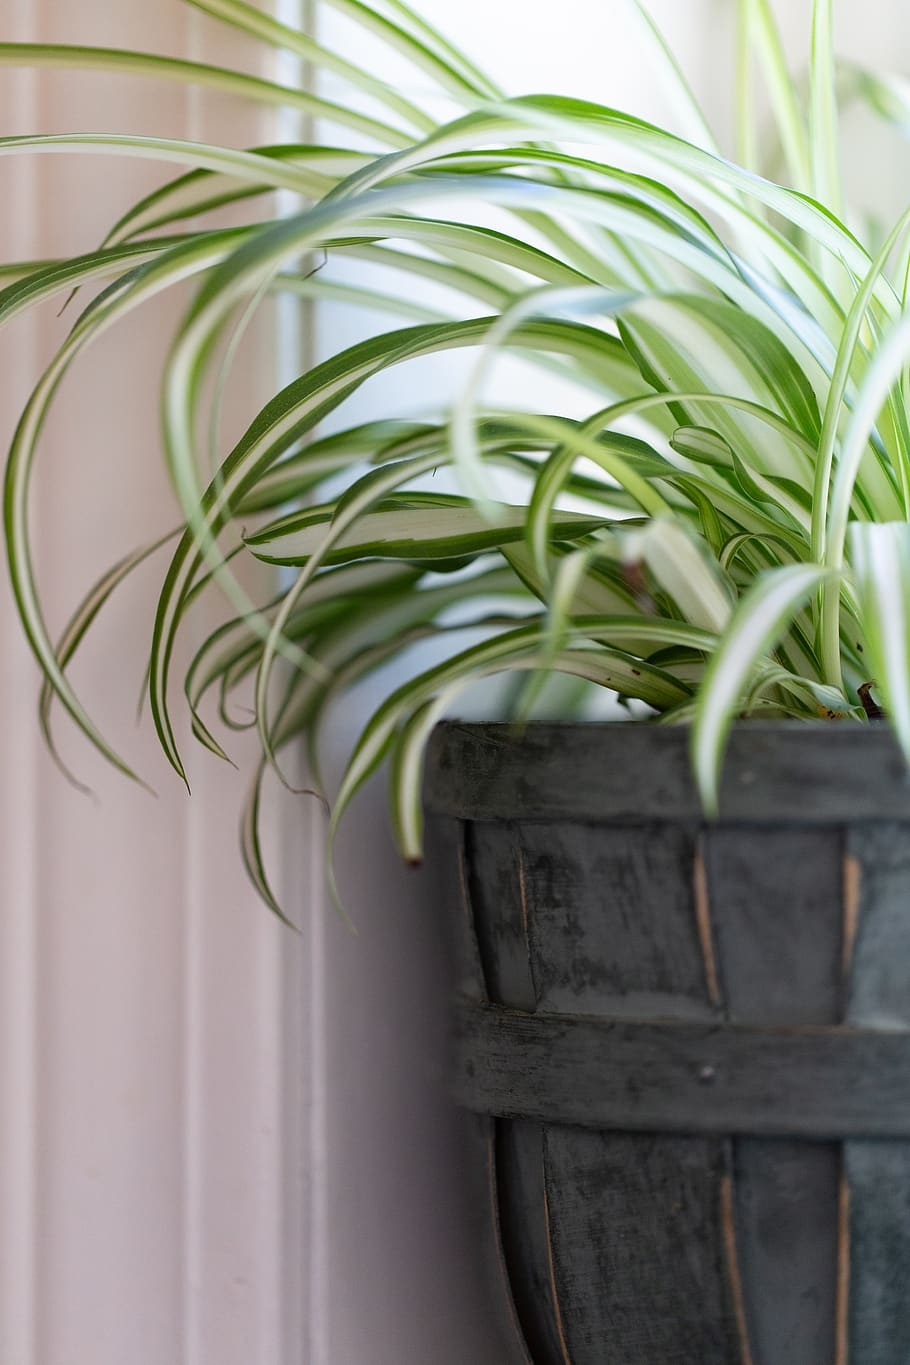 Give Indoor Plants the Right Light   The Stanislaus Sprout   ANR Blogs